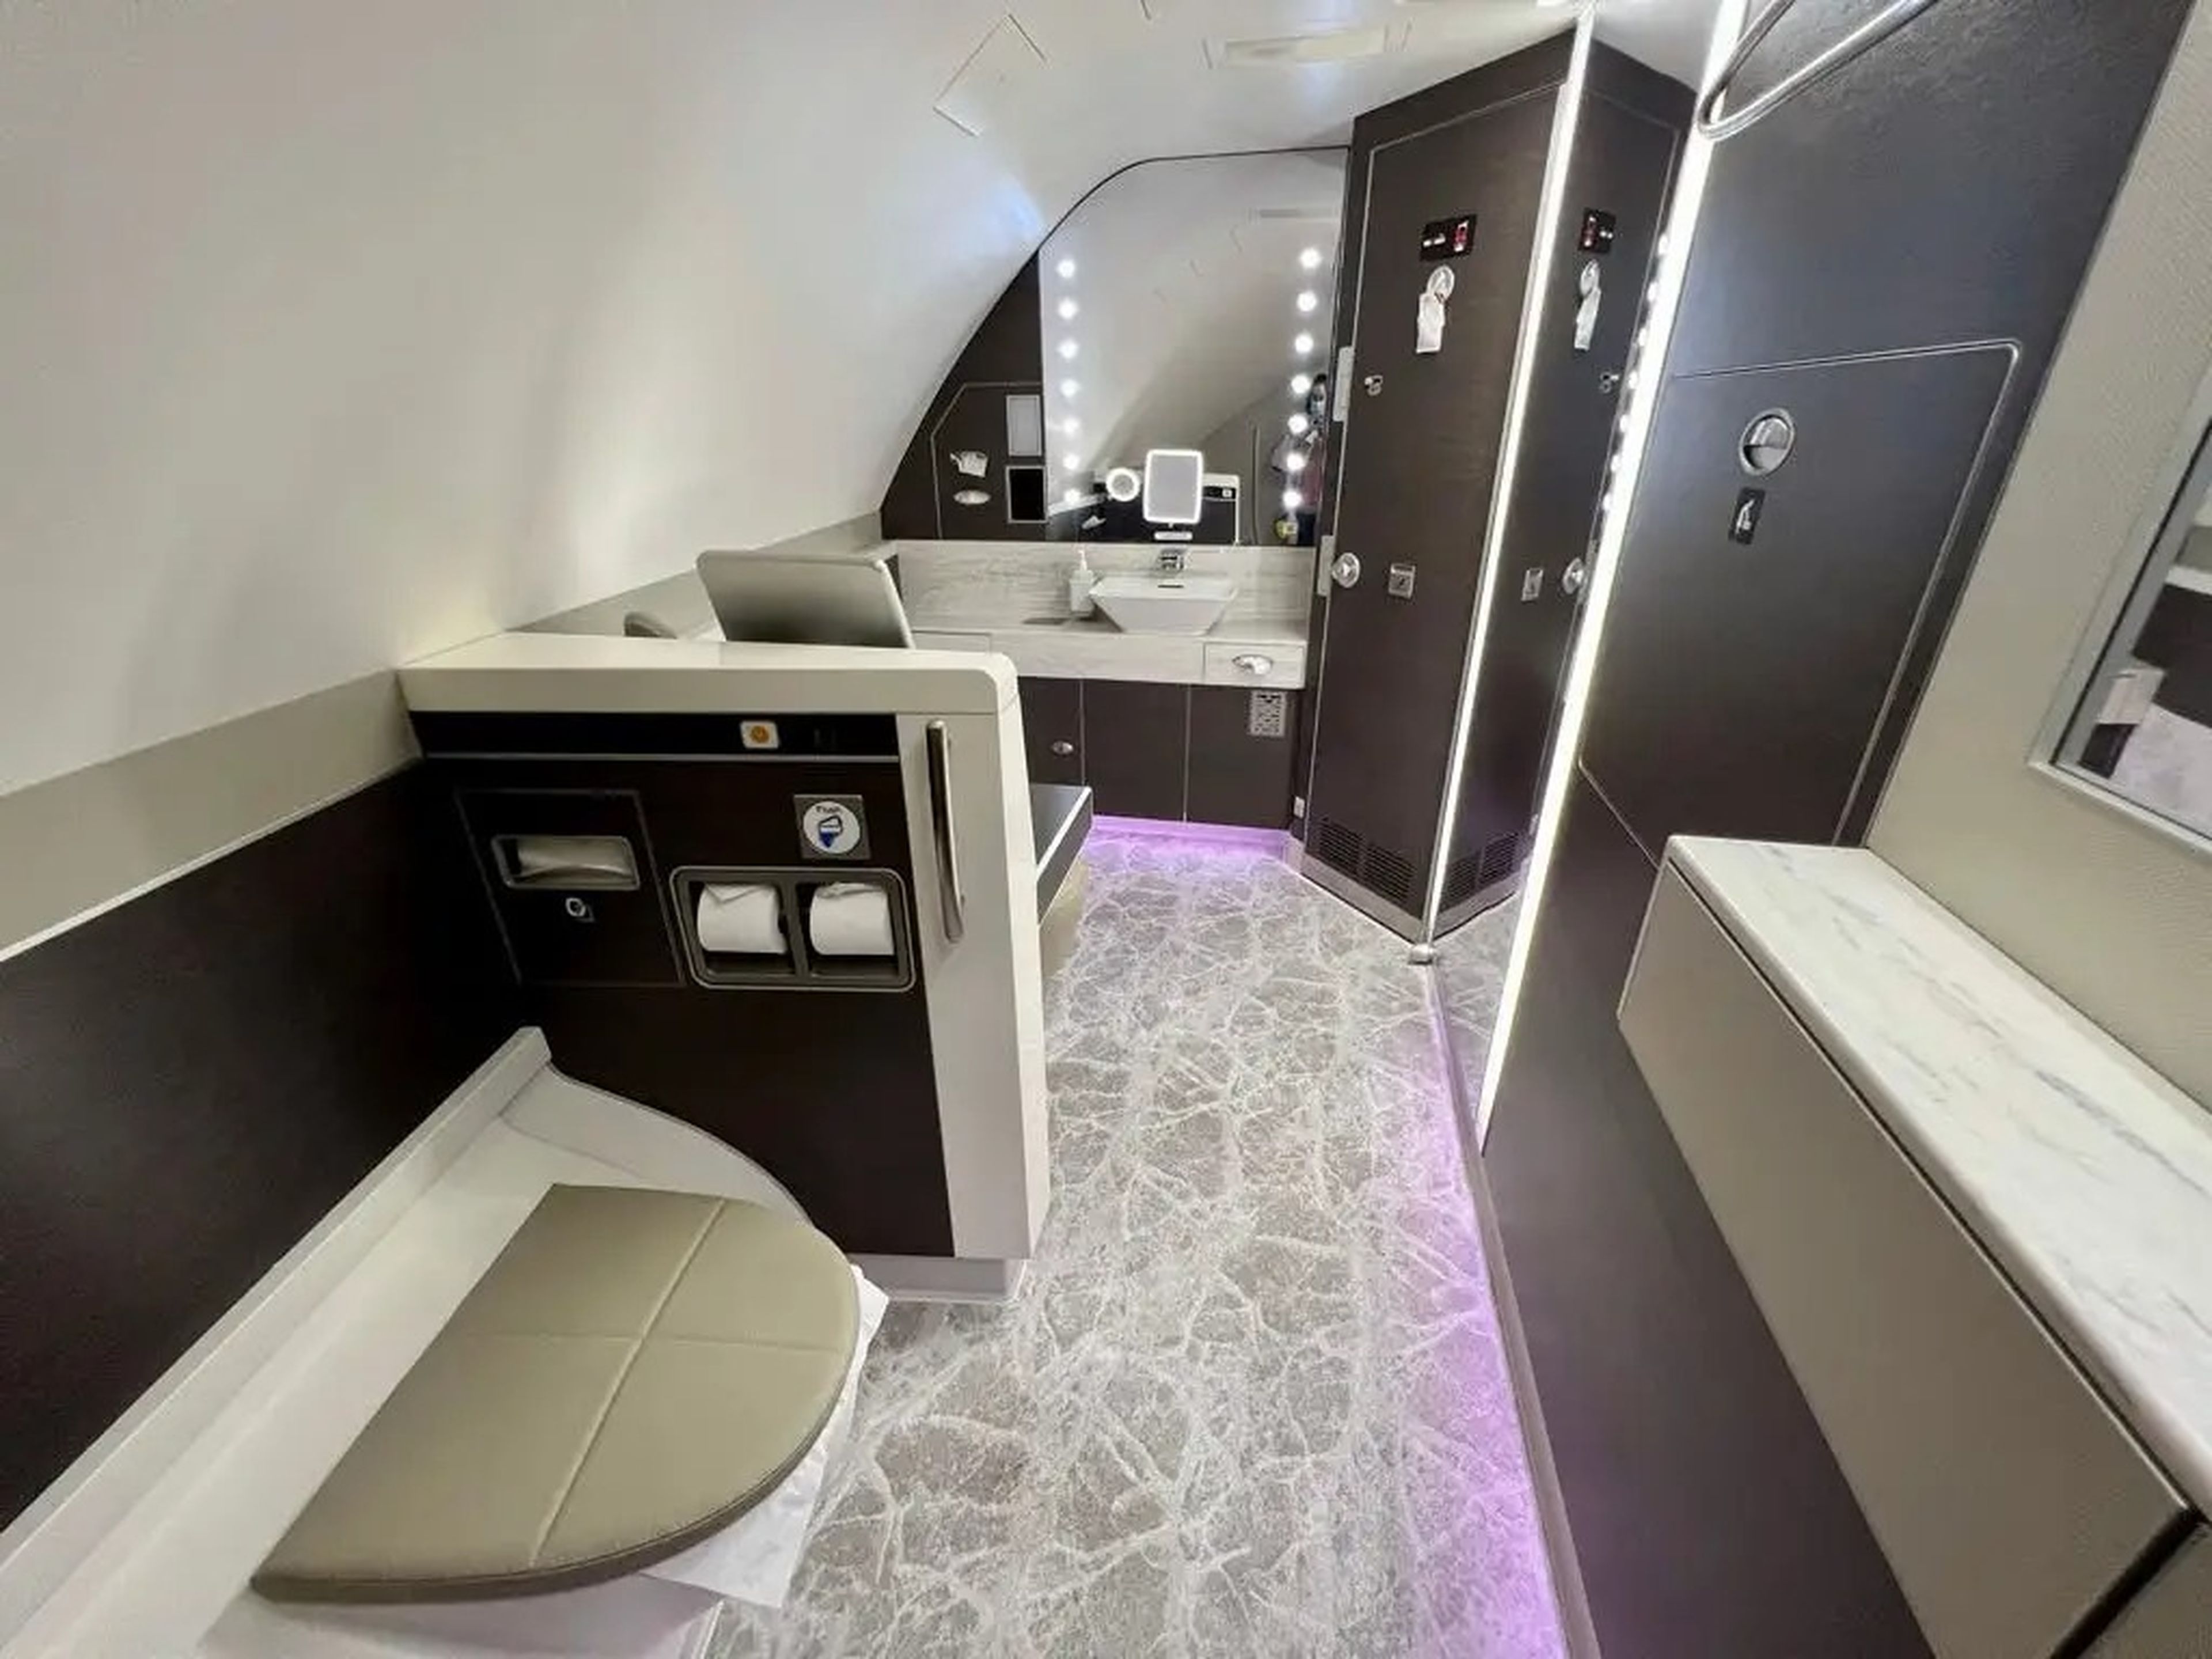 Singapore Airlines A380 first class suite.